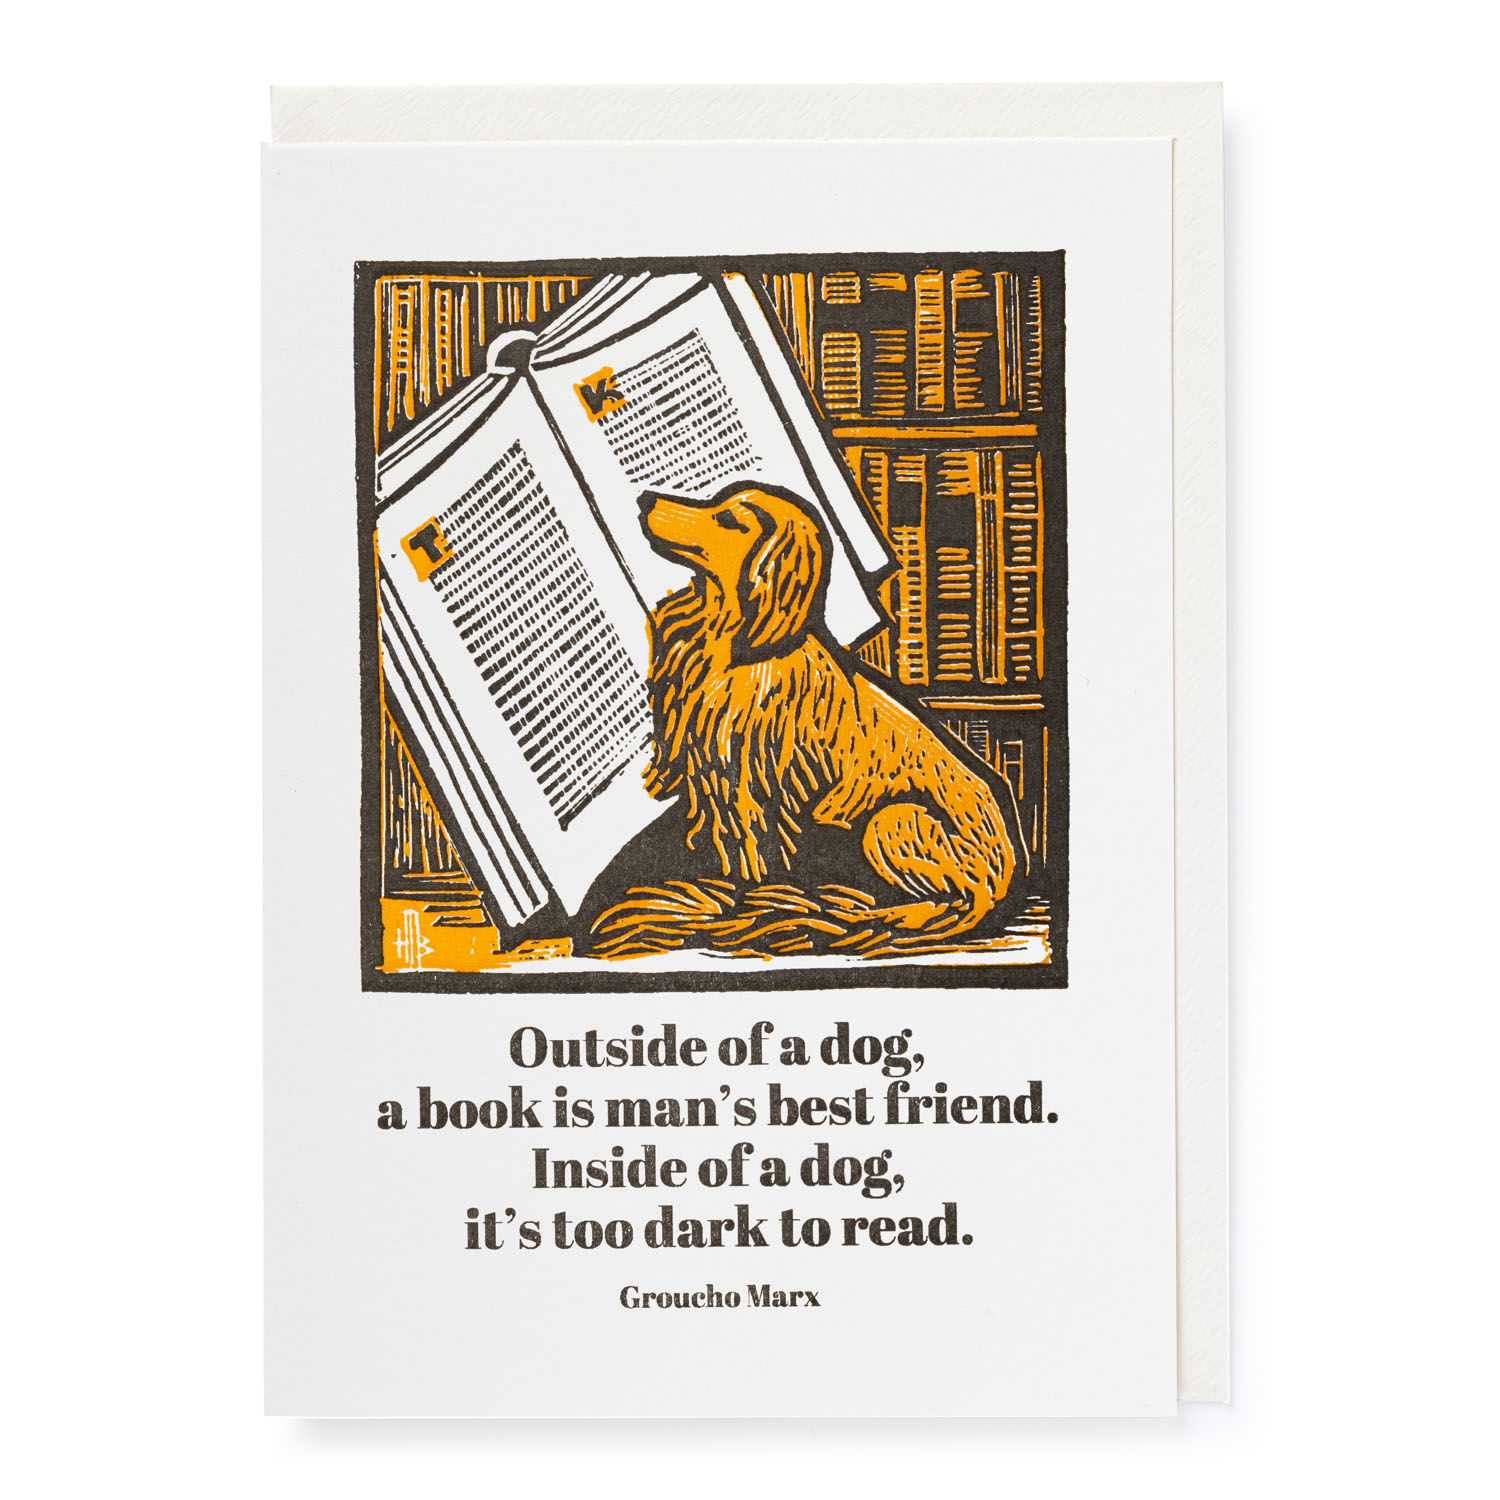 Outside of a dog - Letterpress Cards - Archivist QPs - from Archivist Gallery 